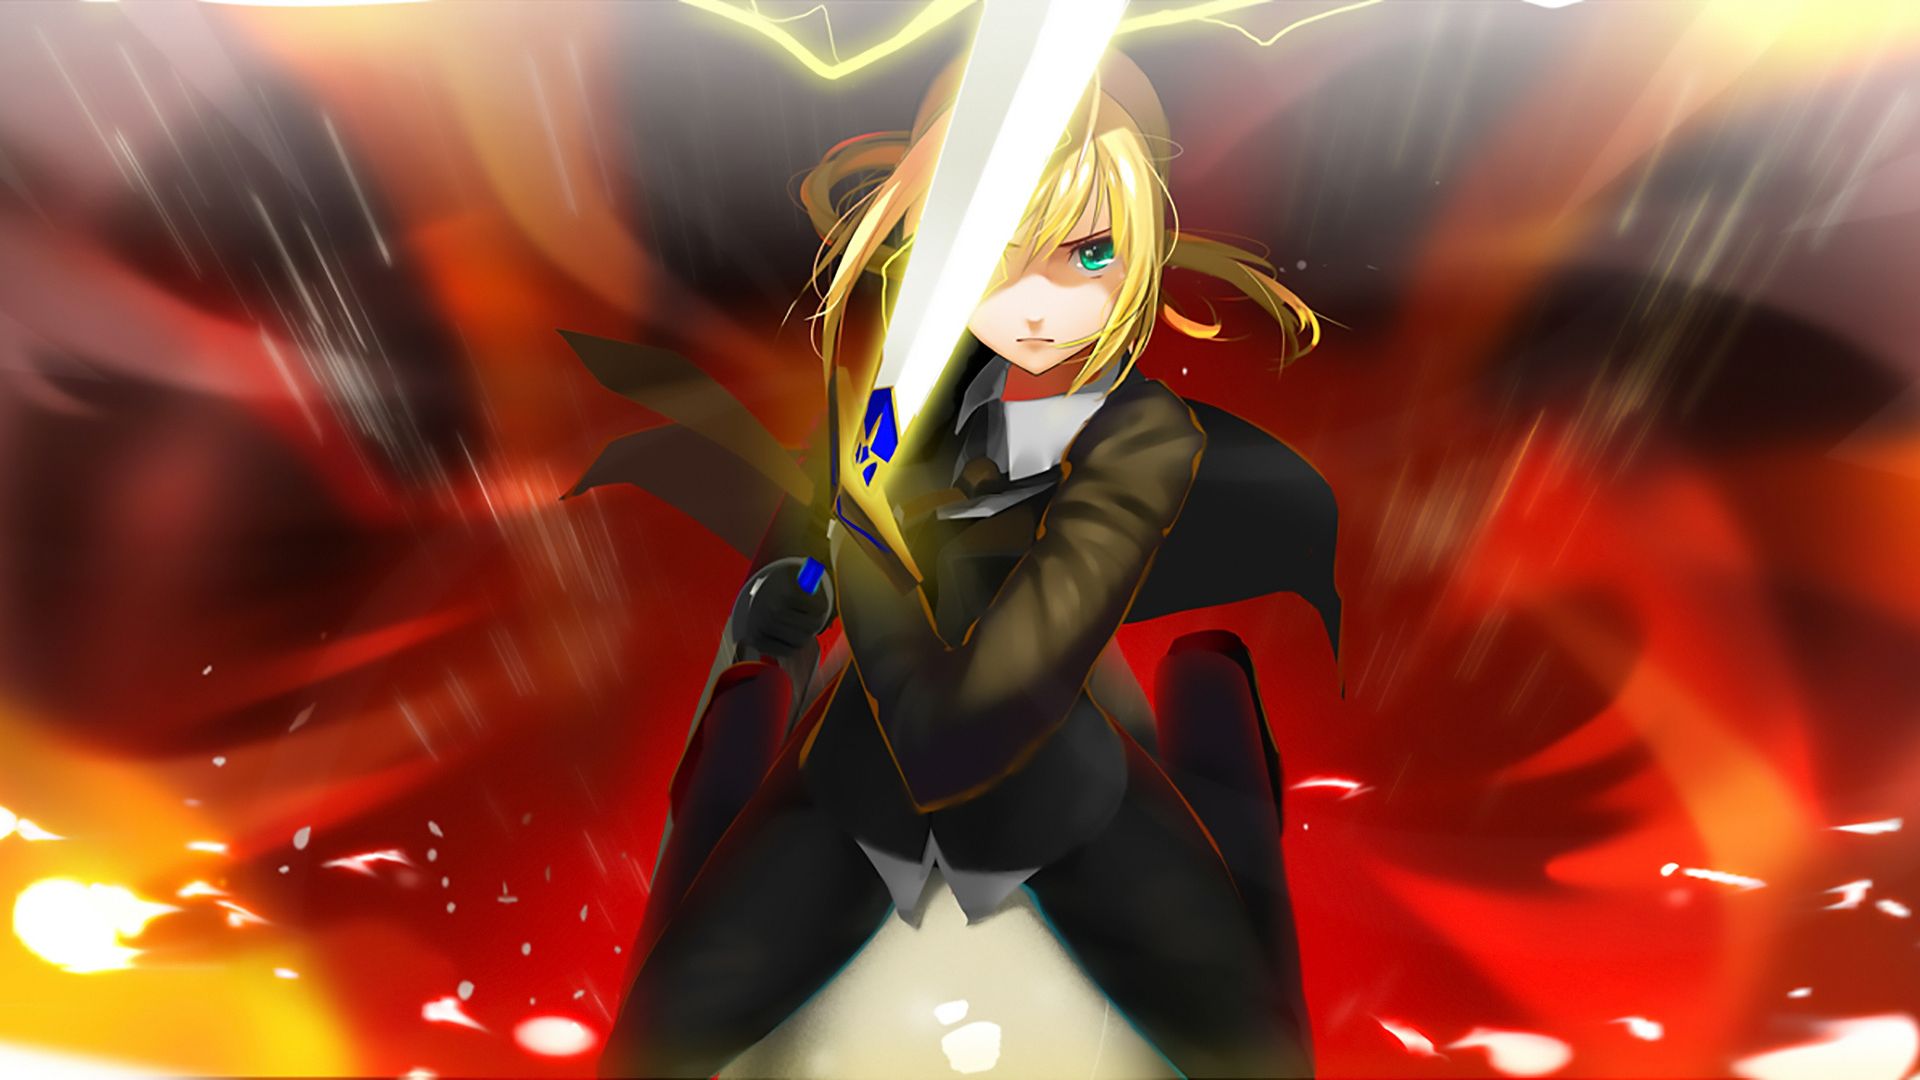 Wallpaper Angry, Saber, fate series, with lighting sword